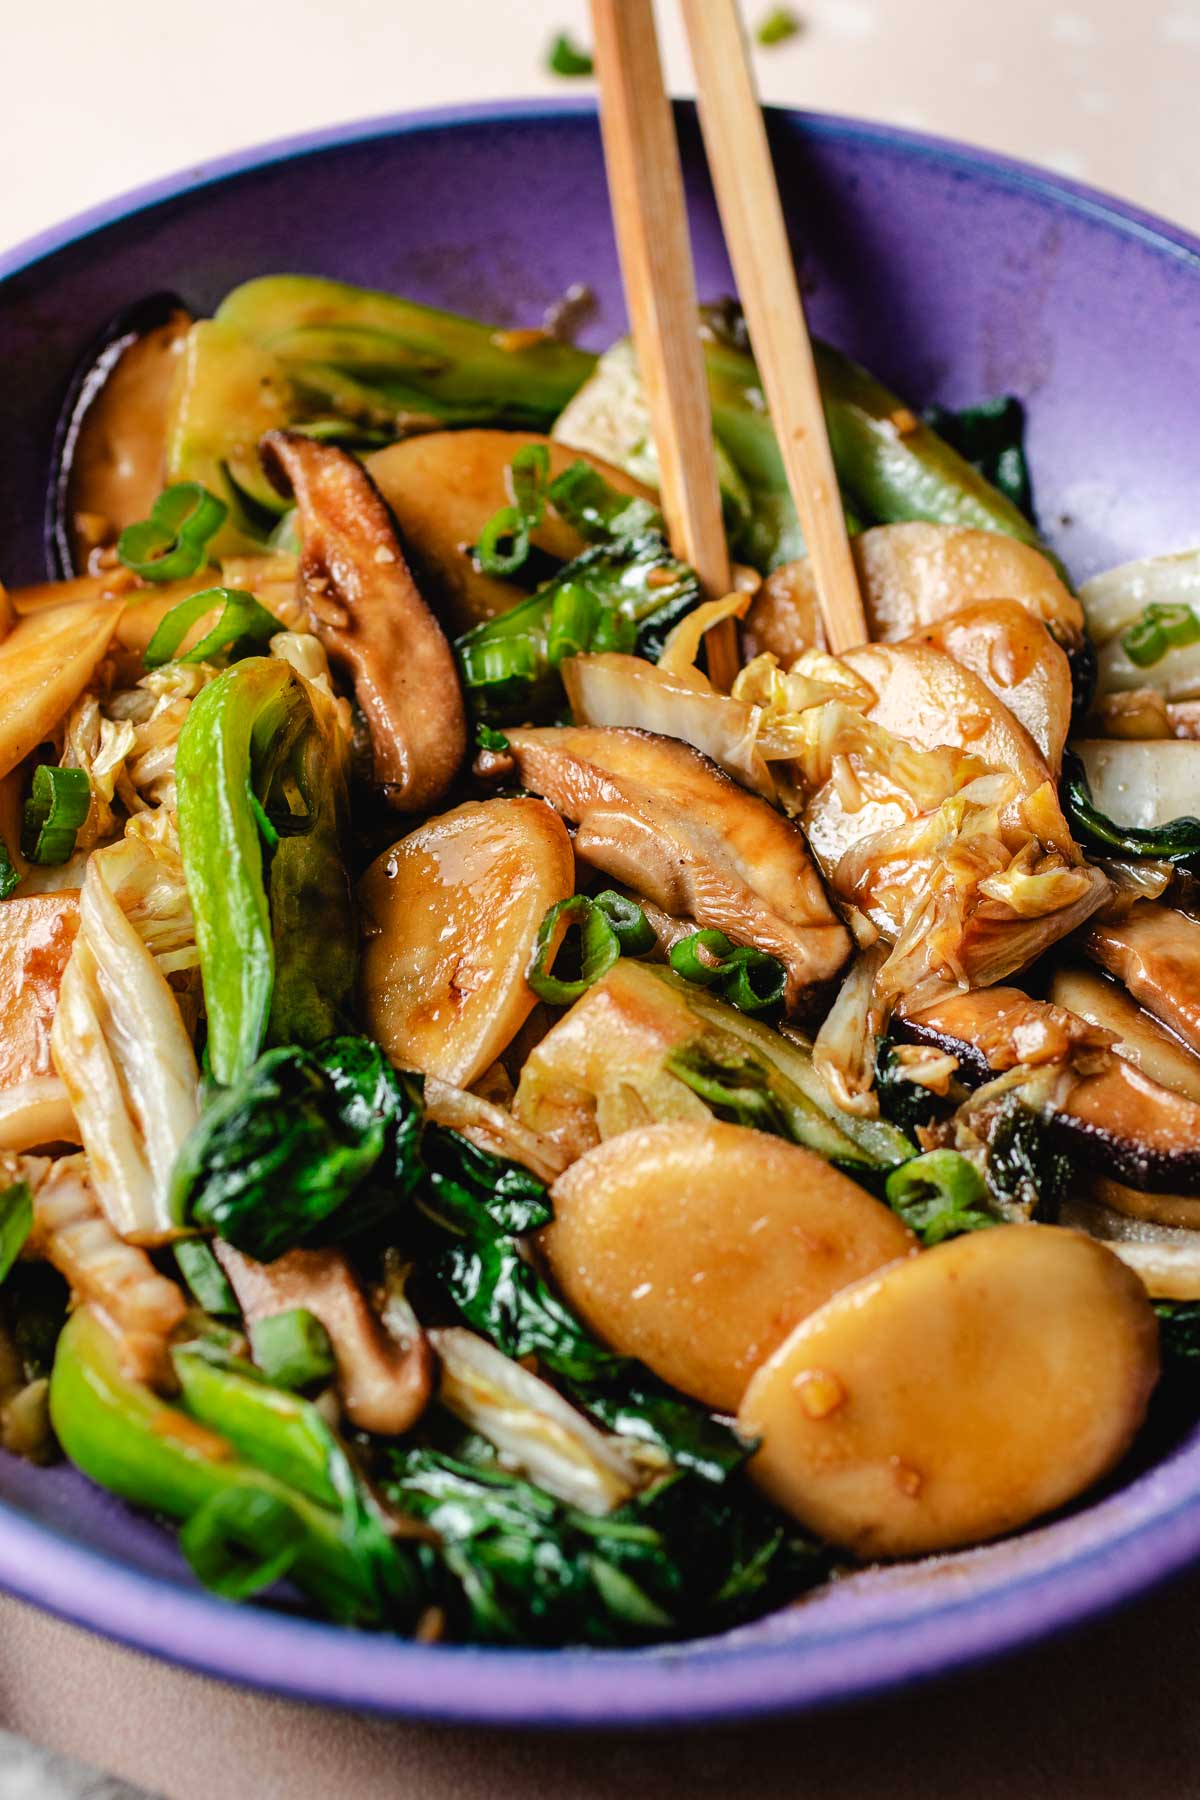 A side close shot features stir fried Shanghai rice cakes in a brown sauce with vegetables.